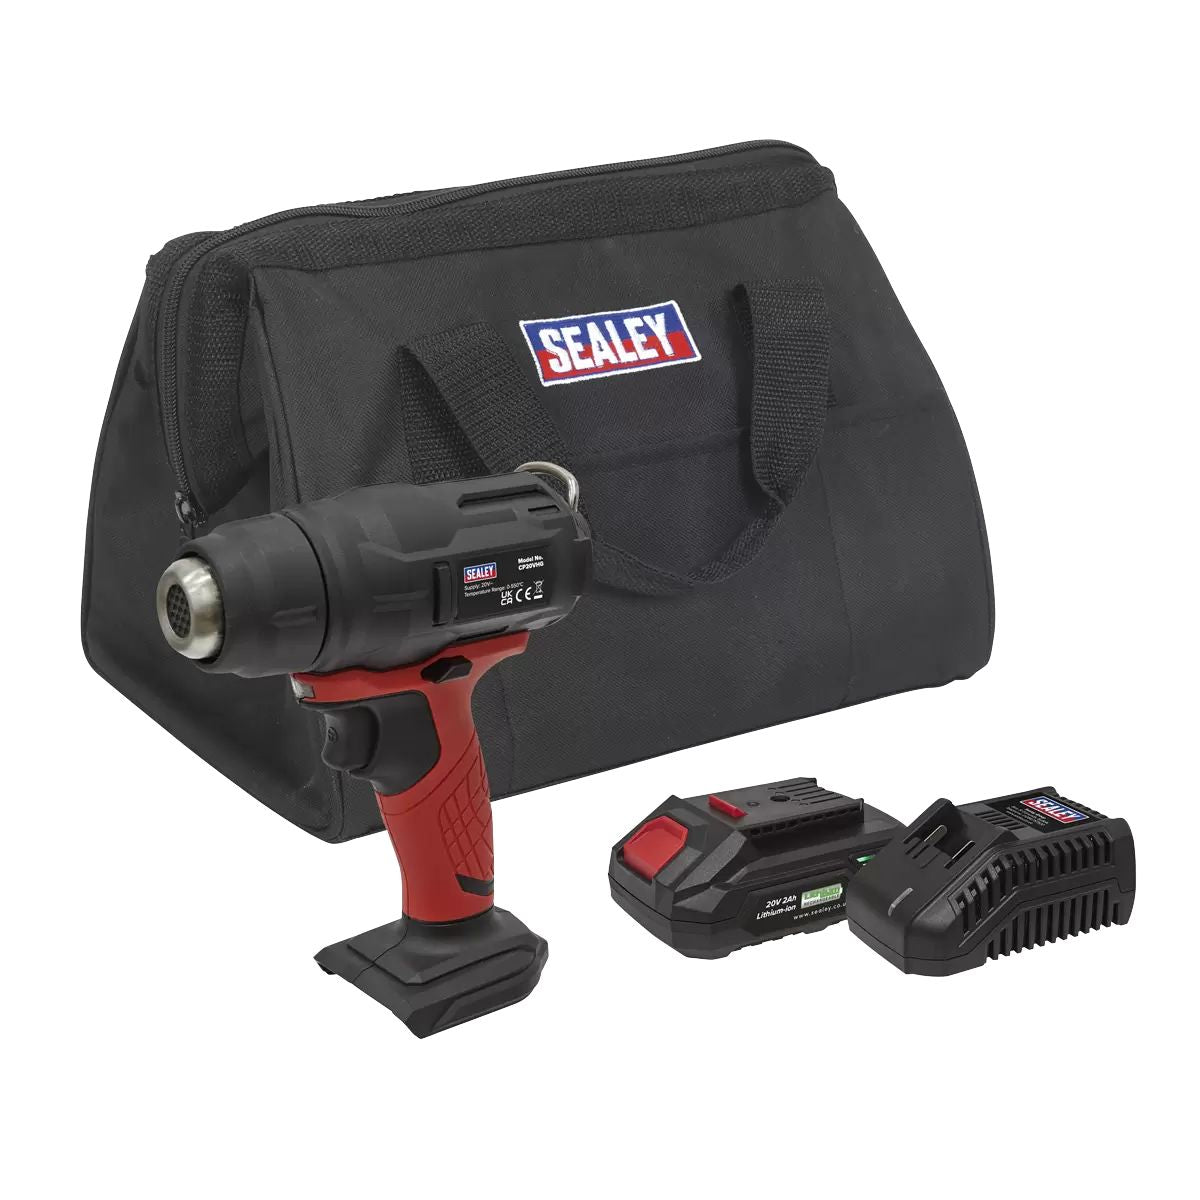 Sealey CP20VHGKIT 20V Cordless Hot Air Gun Kit with 2.0Ah Battery & Charger in Bag